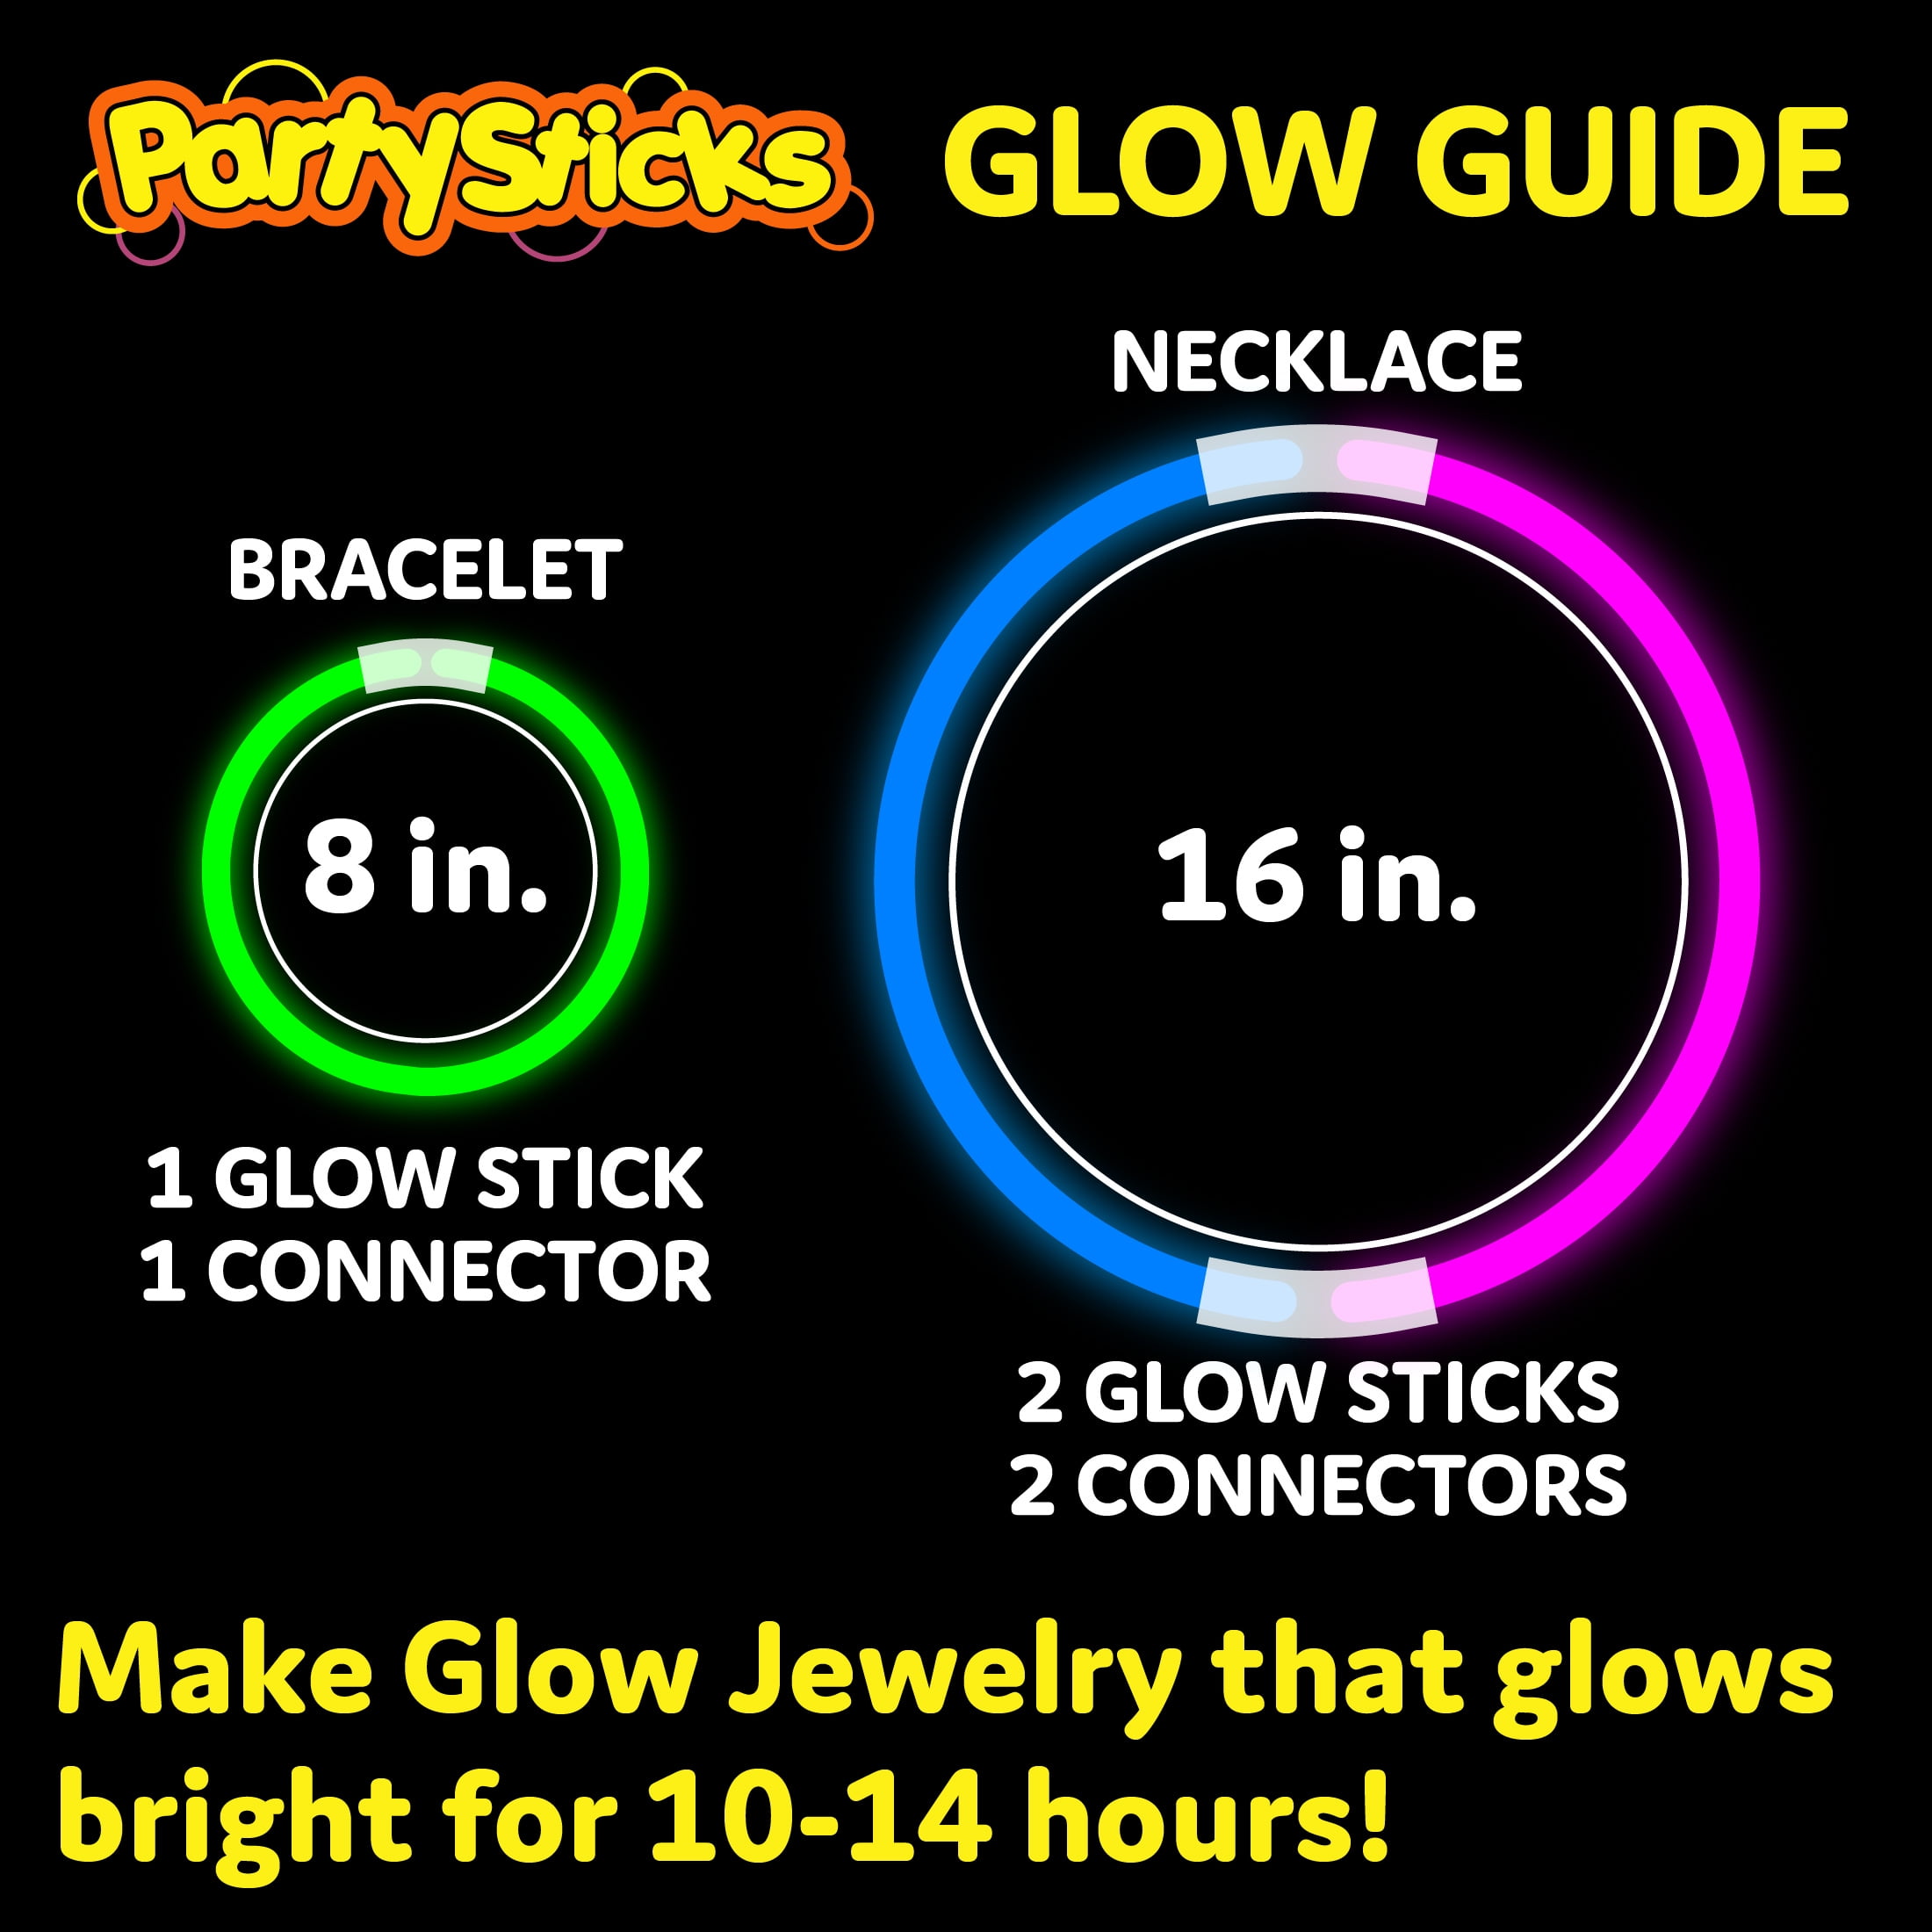 Glow Sticks Bulk 600 Count - 8 Glow In the Dark Light Sticks - Party  Favors & Supplies for Camping, Raves & Birthday Parties 